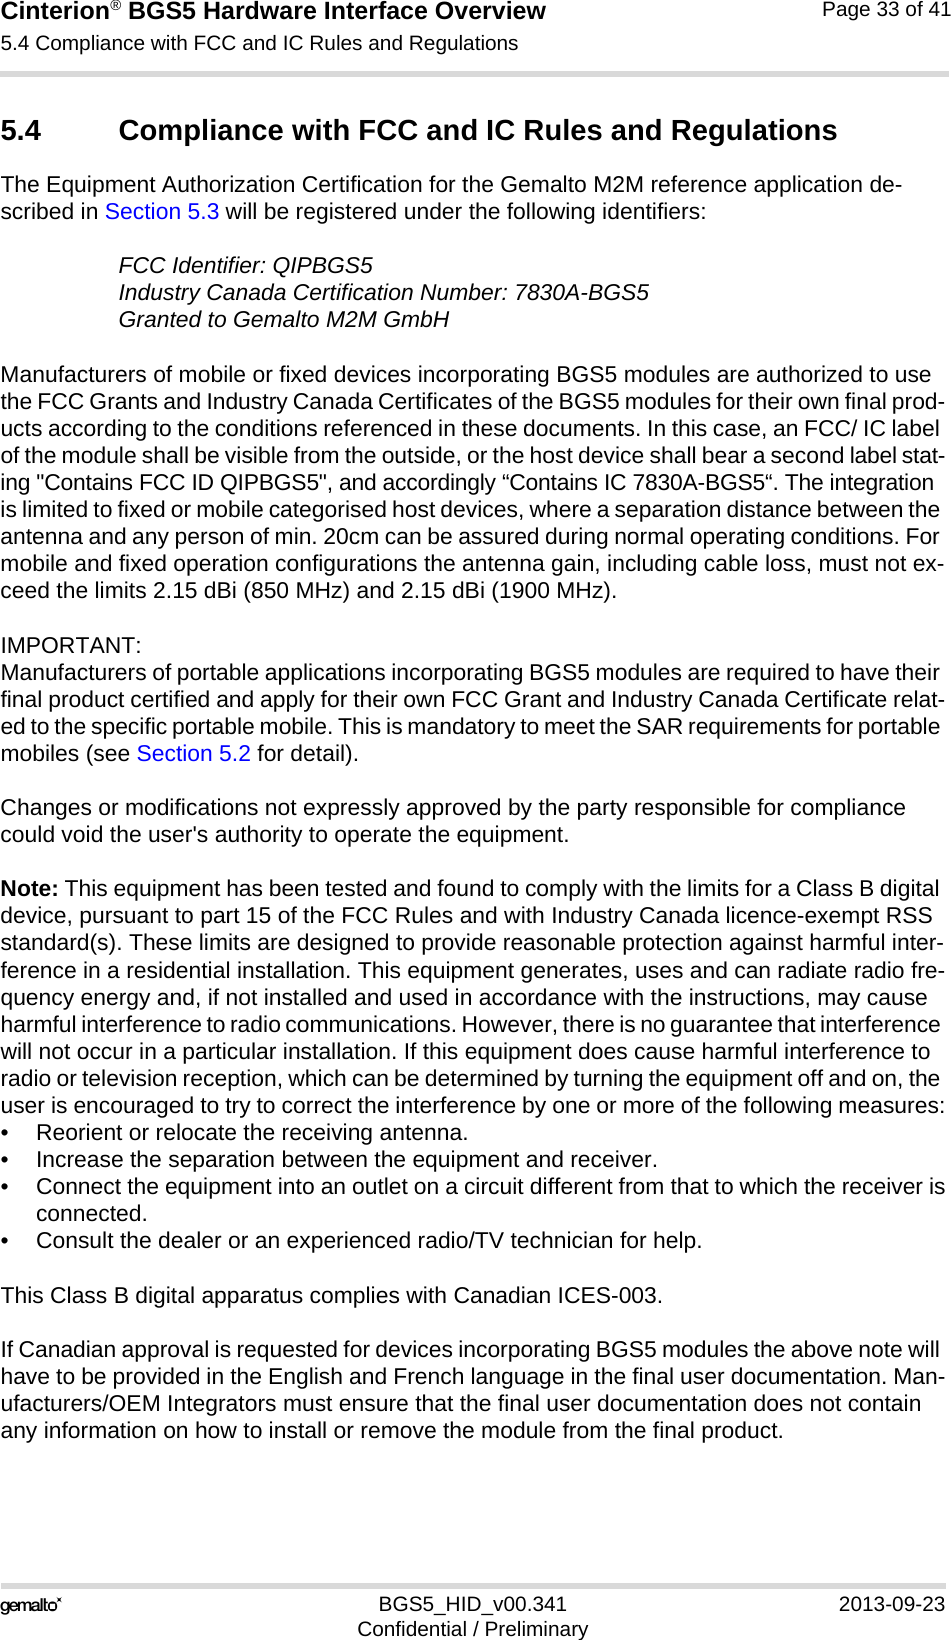 Cinterion® BGS5 Hardware Interface Overview5.4 Compliance with FCC and IC Rules and Regulations33BGS5_HID_v00.341 2013-09-23Confidential / PreliminaryPage 33 of 415.4 Compliance with FCC and IC Rules and RegulationsThe Equipment Authorization Certification for the Gemalto M2M reference application de-scribed in Section 5.3 will be registered under the following identifiers:FCC Identifier: QIPBGS5Industry Canada Certification Number: 7830A-BGS5Granted to Gemalto M2M GmbH Manufacturers of mobile or fixed devices incorporating BGS5 modules are authorized to use the FCC Grants and Industry Canada Certificates of the BGS5 modules for their own final prod-ucts according to the conditions referenced in these documents. In this case, an FCC/ IC label of the module shall be visible from the outside, or the host device shall bear a second label stat-ing &quot;Contains FCC ID QIPBGS5&quot;, and accordingly “Contains IC 7830A-BGS5“. The integration is limited to fixed or mobile categorised host devices, where a separation distance between the antenna and any person of min. 20cm can be assured during normal operating conditions. For mobile and fixed operation configurations the antenna gain, including cable loss, must not ex-ceed the limits 2.15 dBi (850 MHz) and 2.15 dBi (1900 MHz).IMPORTANT: Manufacturers of portable applications incorporating BGS5 modules are required to have their final product certified and apply for their own FCC Grant and Industry Canada Certificate relat-ed to the specific portable mobile. This is mandatory to meet the SAR requirements for portable mobiles (see Section 5.2 for detail).Changes or modifications not expressly approved by the party responsible for compliance could void the user&apos;s authority to operate the equipment.Note: This equipment has been tested and found to comply with the limits for a Class B digital device, pursuant to part 15 of the FCC Rules and with Industry Canada licence-exempt RSS standard(s). These limits are designed to provide reasonable protection against harmful inter-ference in a residential installation. This equipment generates, uses and can radiate radio fre-quency energy and, if not installed and used in accordance with the instructions, may cause harmful interference to radio communications. However, there is no guarantee that interference will not occur in a particular installation. If this equipment does cause harmful interference to radio or television reception, which can be determined by turning the equipment off and on, the user is encouraged to try to correct the interference by one or more of the following measures:• Reorient or relocate the receiving antenna.• Increase the separation between the equipment and receiver.• Connect the equipment into an outlet on a circuit different from that to which the receiver isconnected.• Consult the dealer or an experienced radio/TV technician for help.This Class B digital apparatus complies with Canadian ICES-003.If Canadian approval is requested for devices incorporating BGS5 modules the above note will have to be provided in the English and French language in the final user documentation. Man-ufacturers/OEM Integrators must ensure that the final user documentation does not contain any information on how to install or remove the module from the final product.